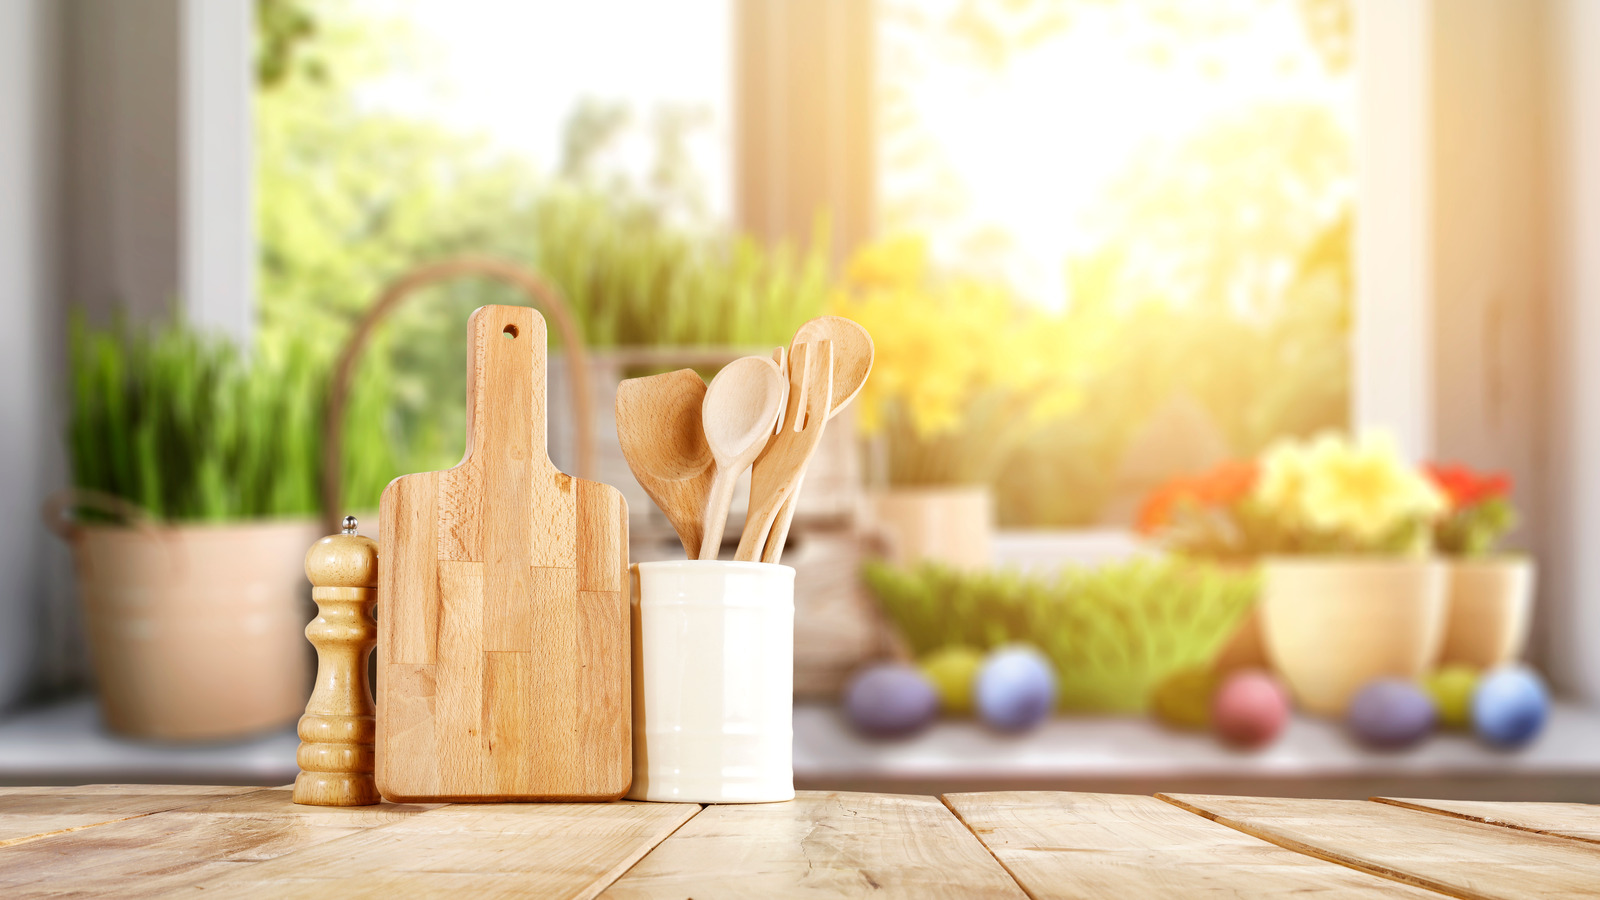 Kitchen Supplies Checklist: What Should You Buy When Moving Into A New Home?  – Forbes Home